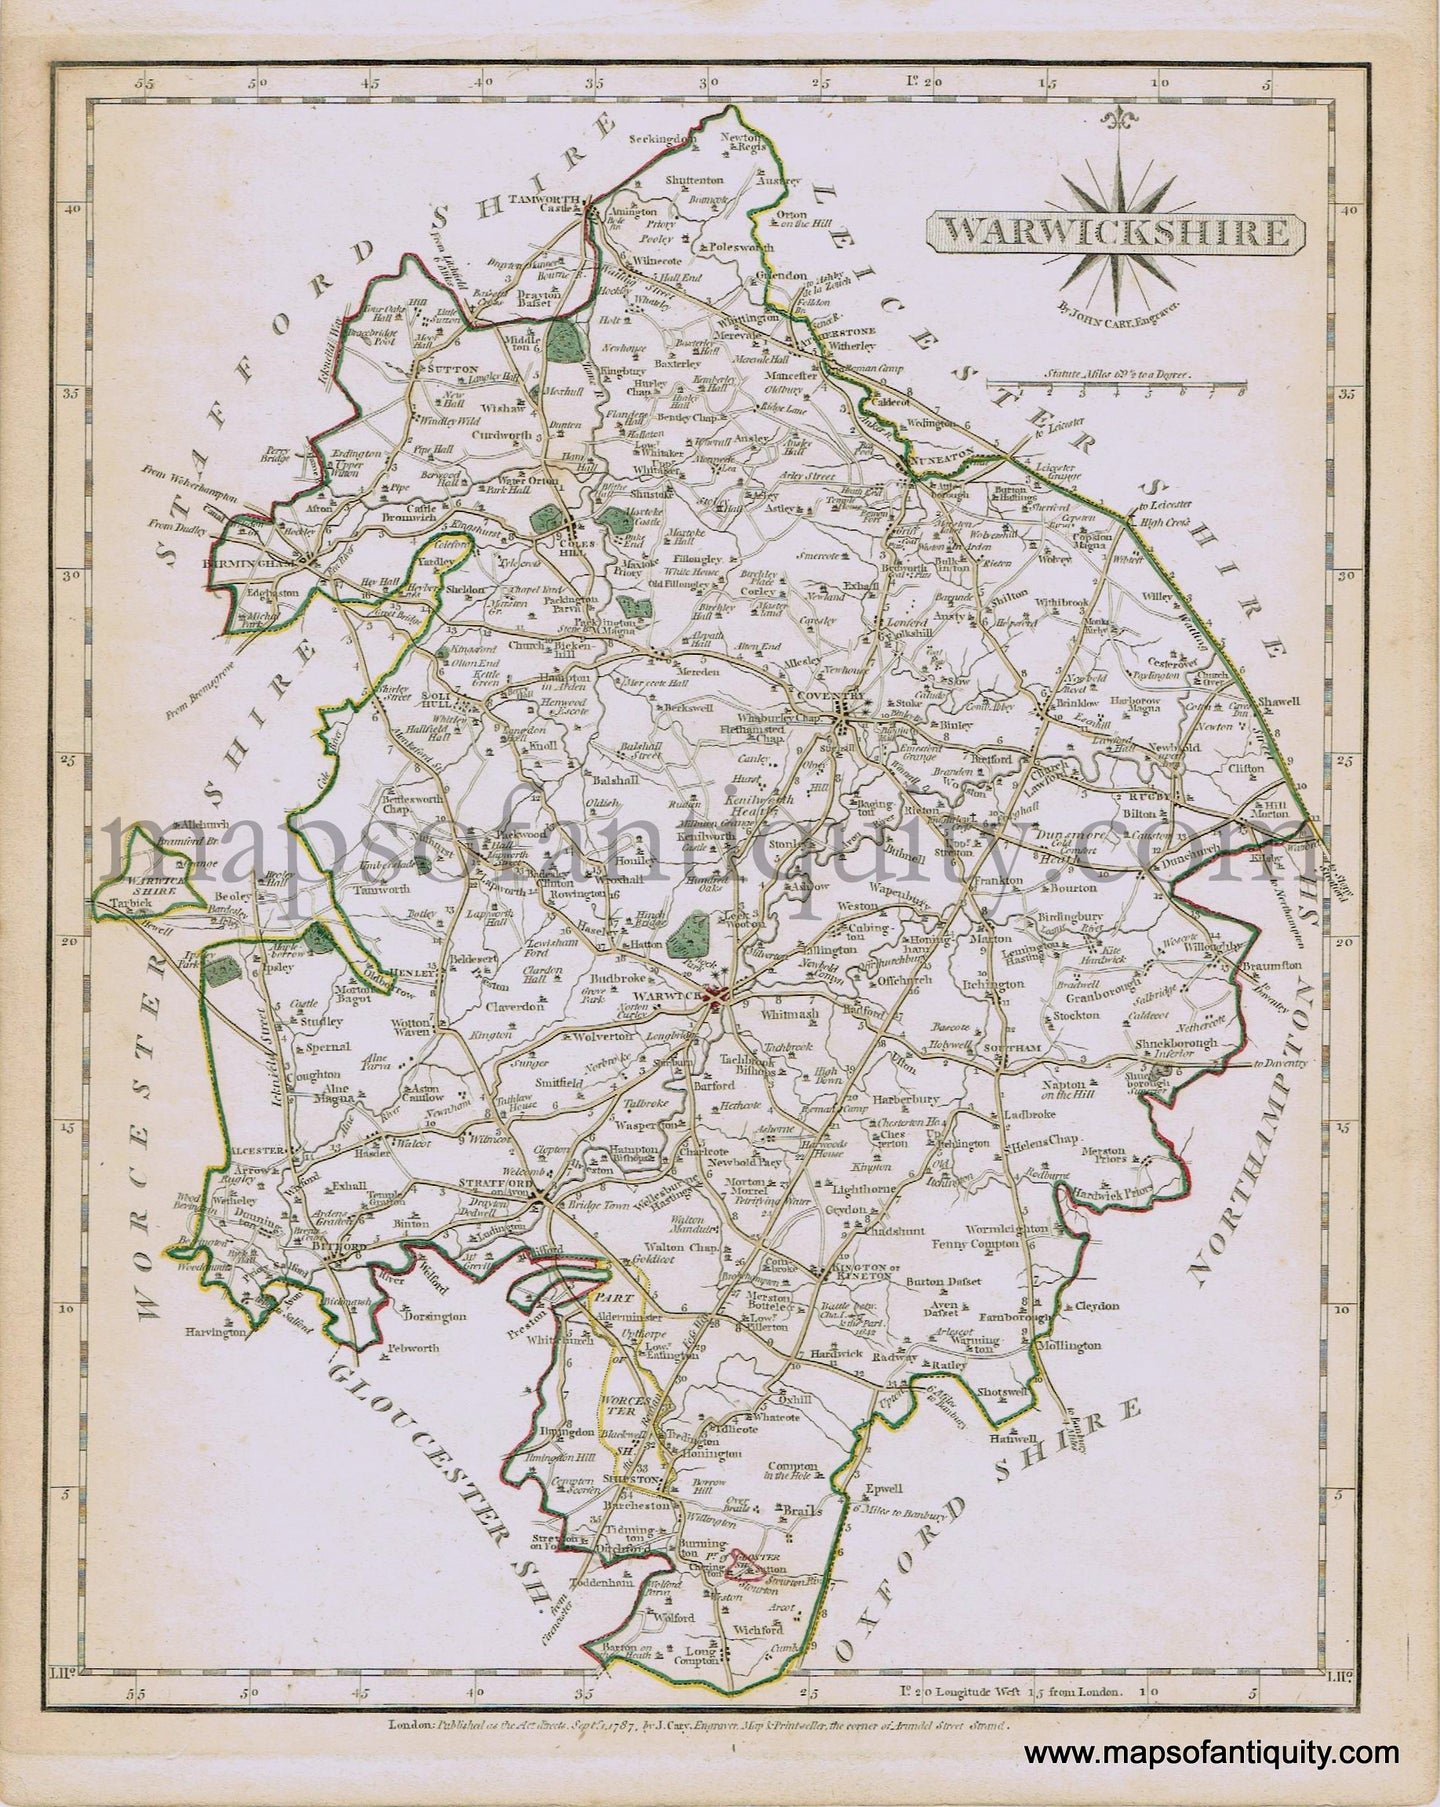 Antique-Hand-Colored-Map-Warwickshire-1787-John-Cary-England--1700s-18th-century-Maps-of-Antiquity